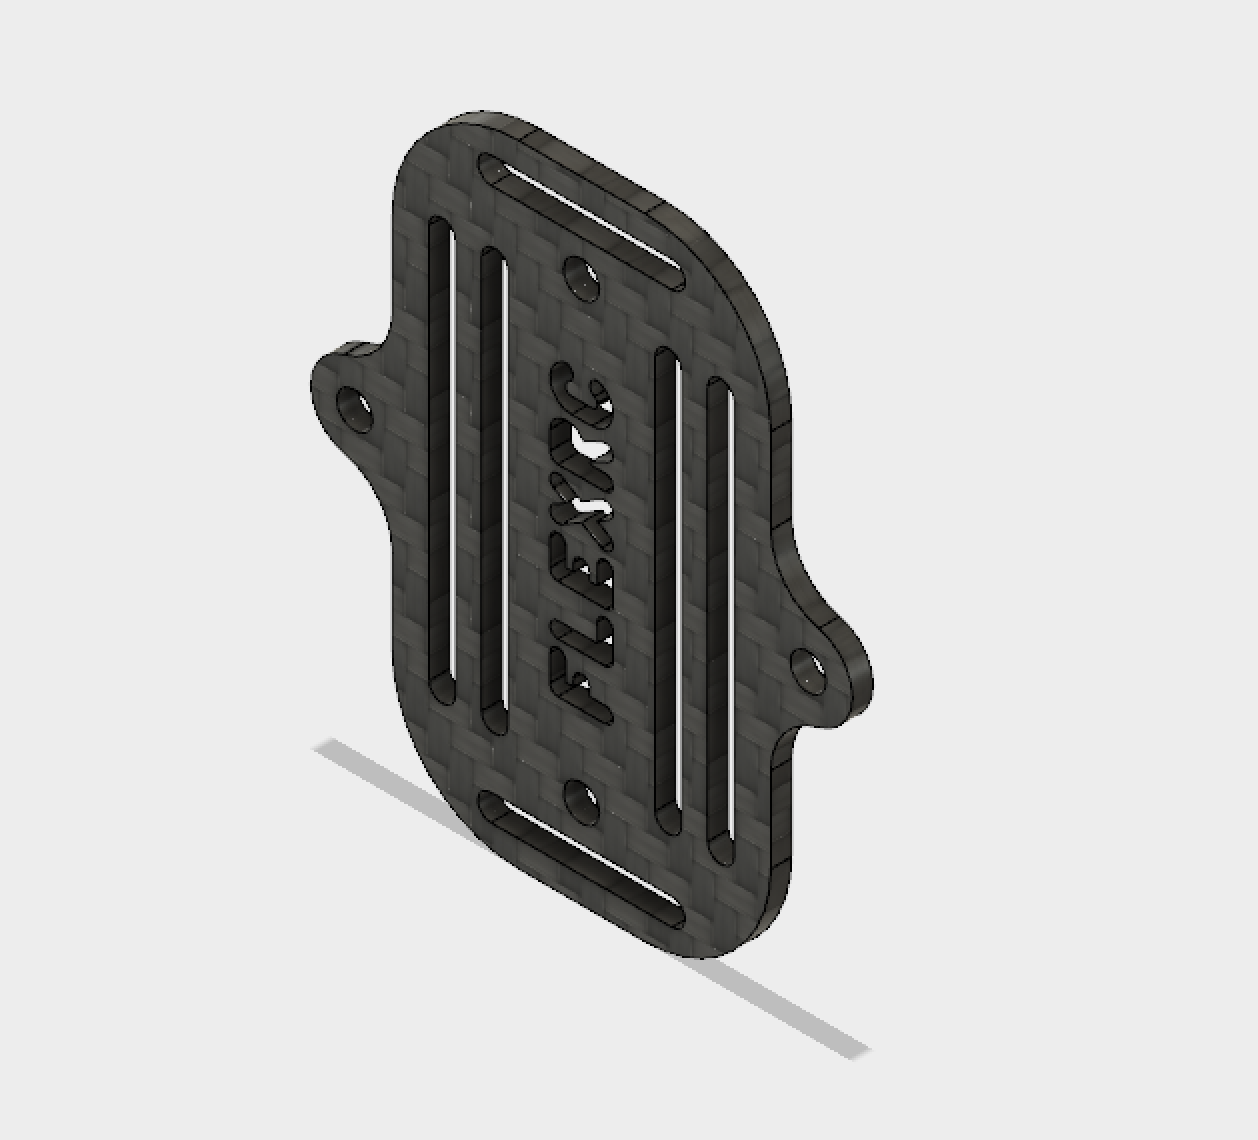 Owl - Battery mounting / protecting plate